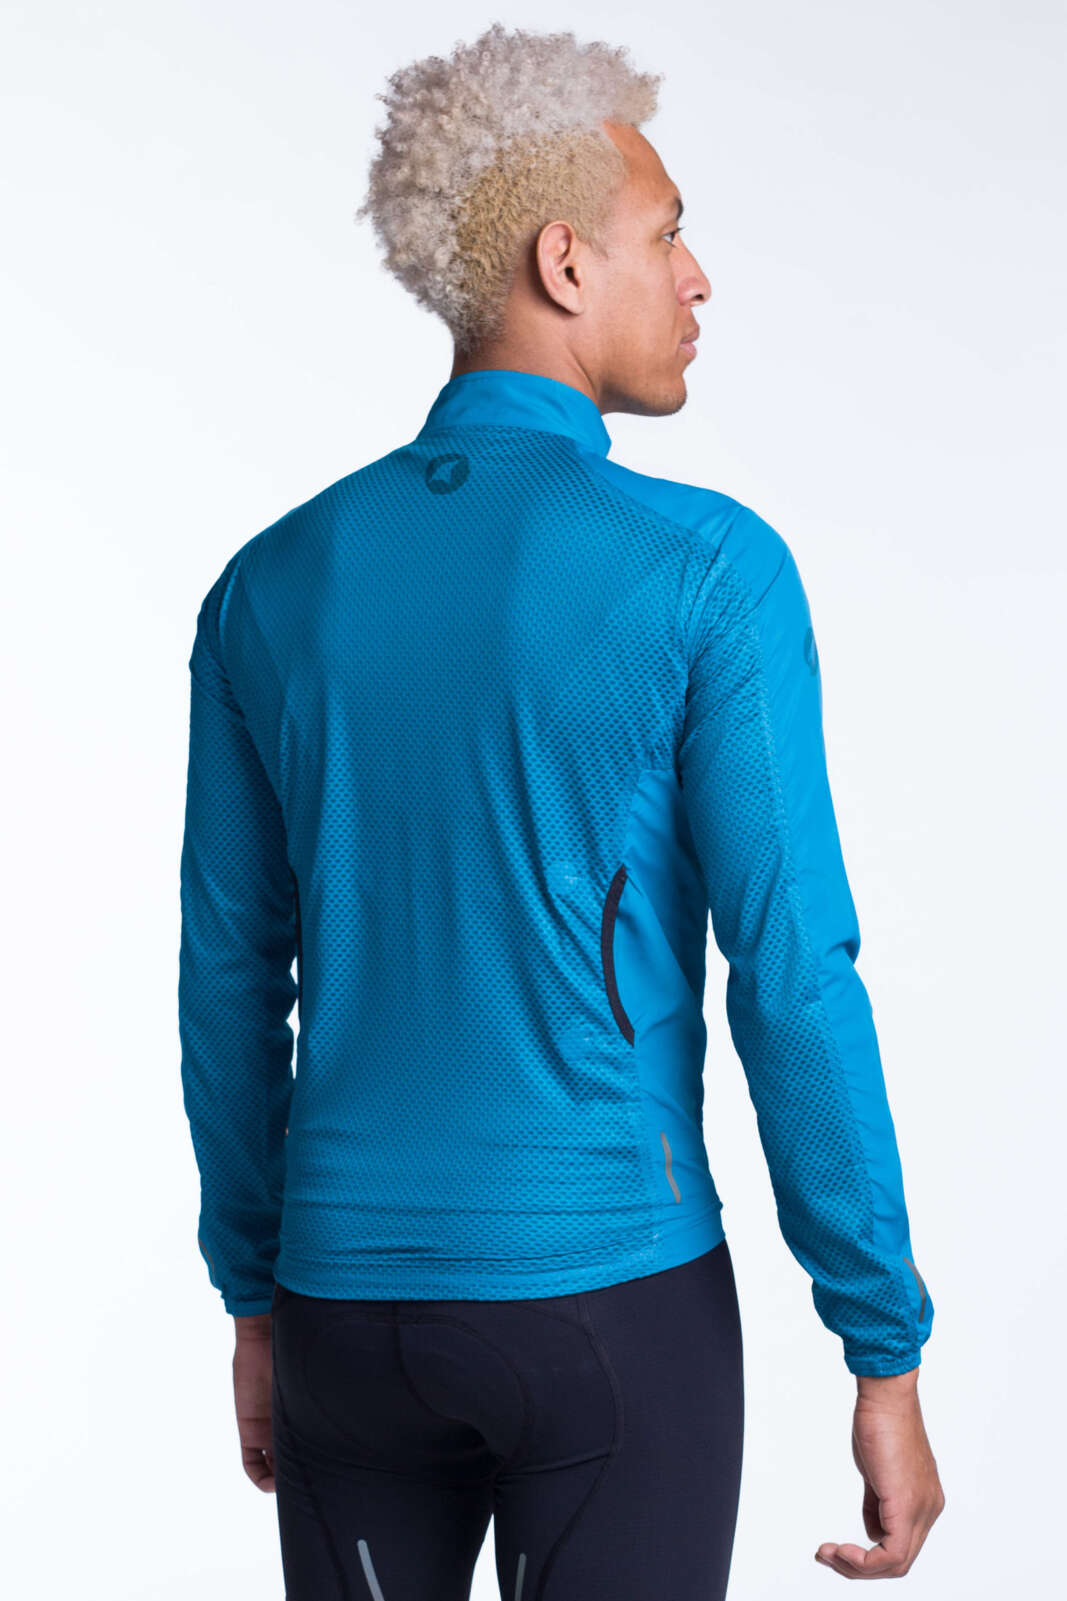 Men's Teal Packable Cycling Wind Jacket  - Back View